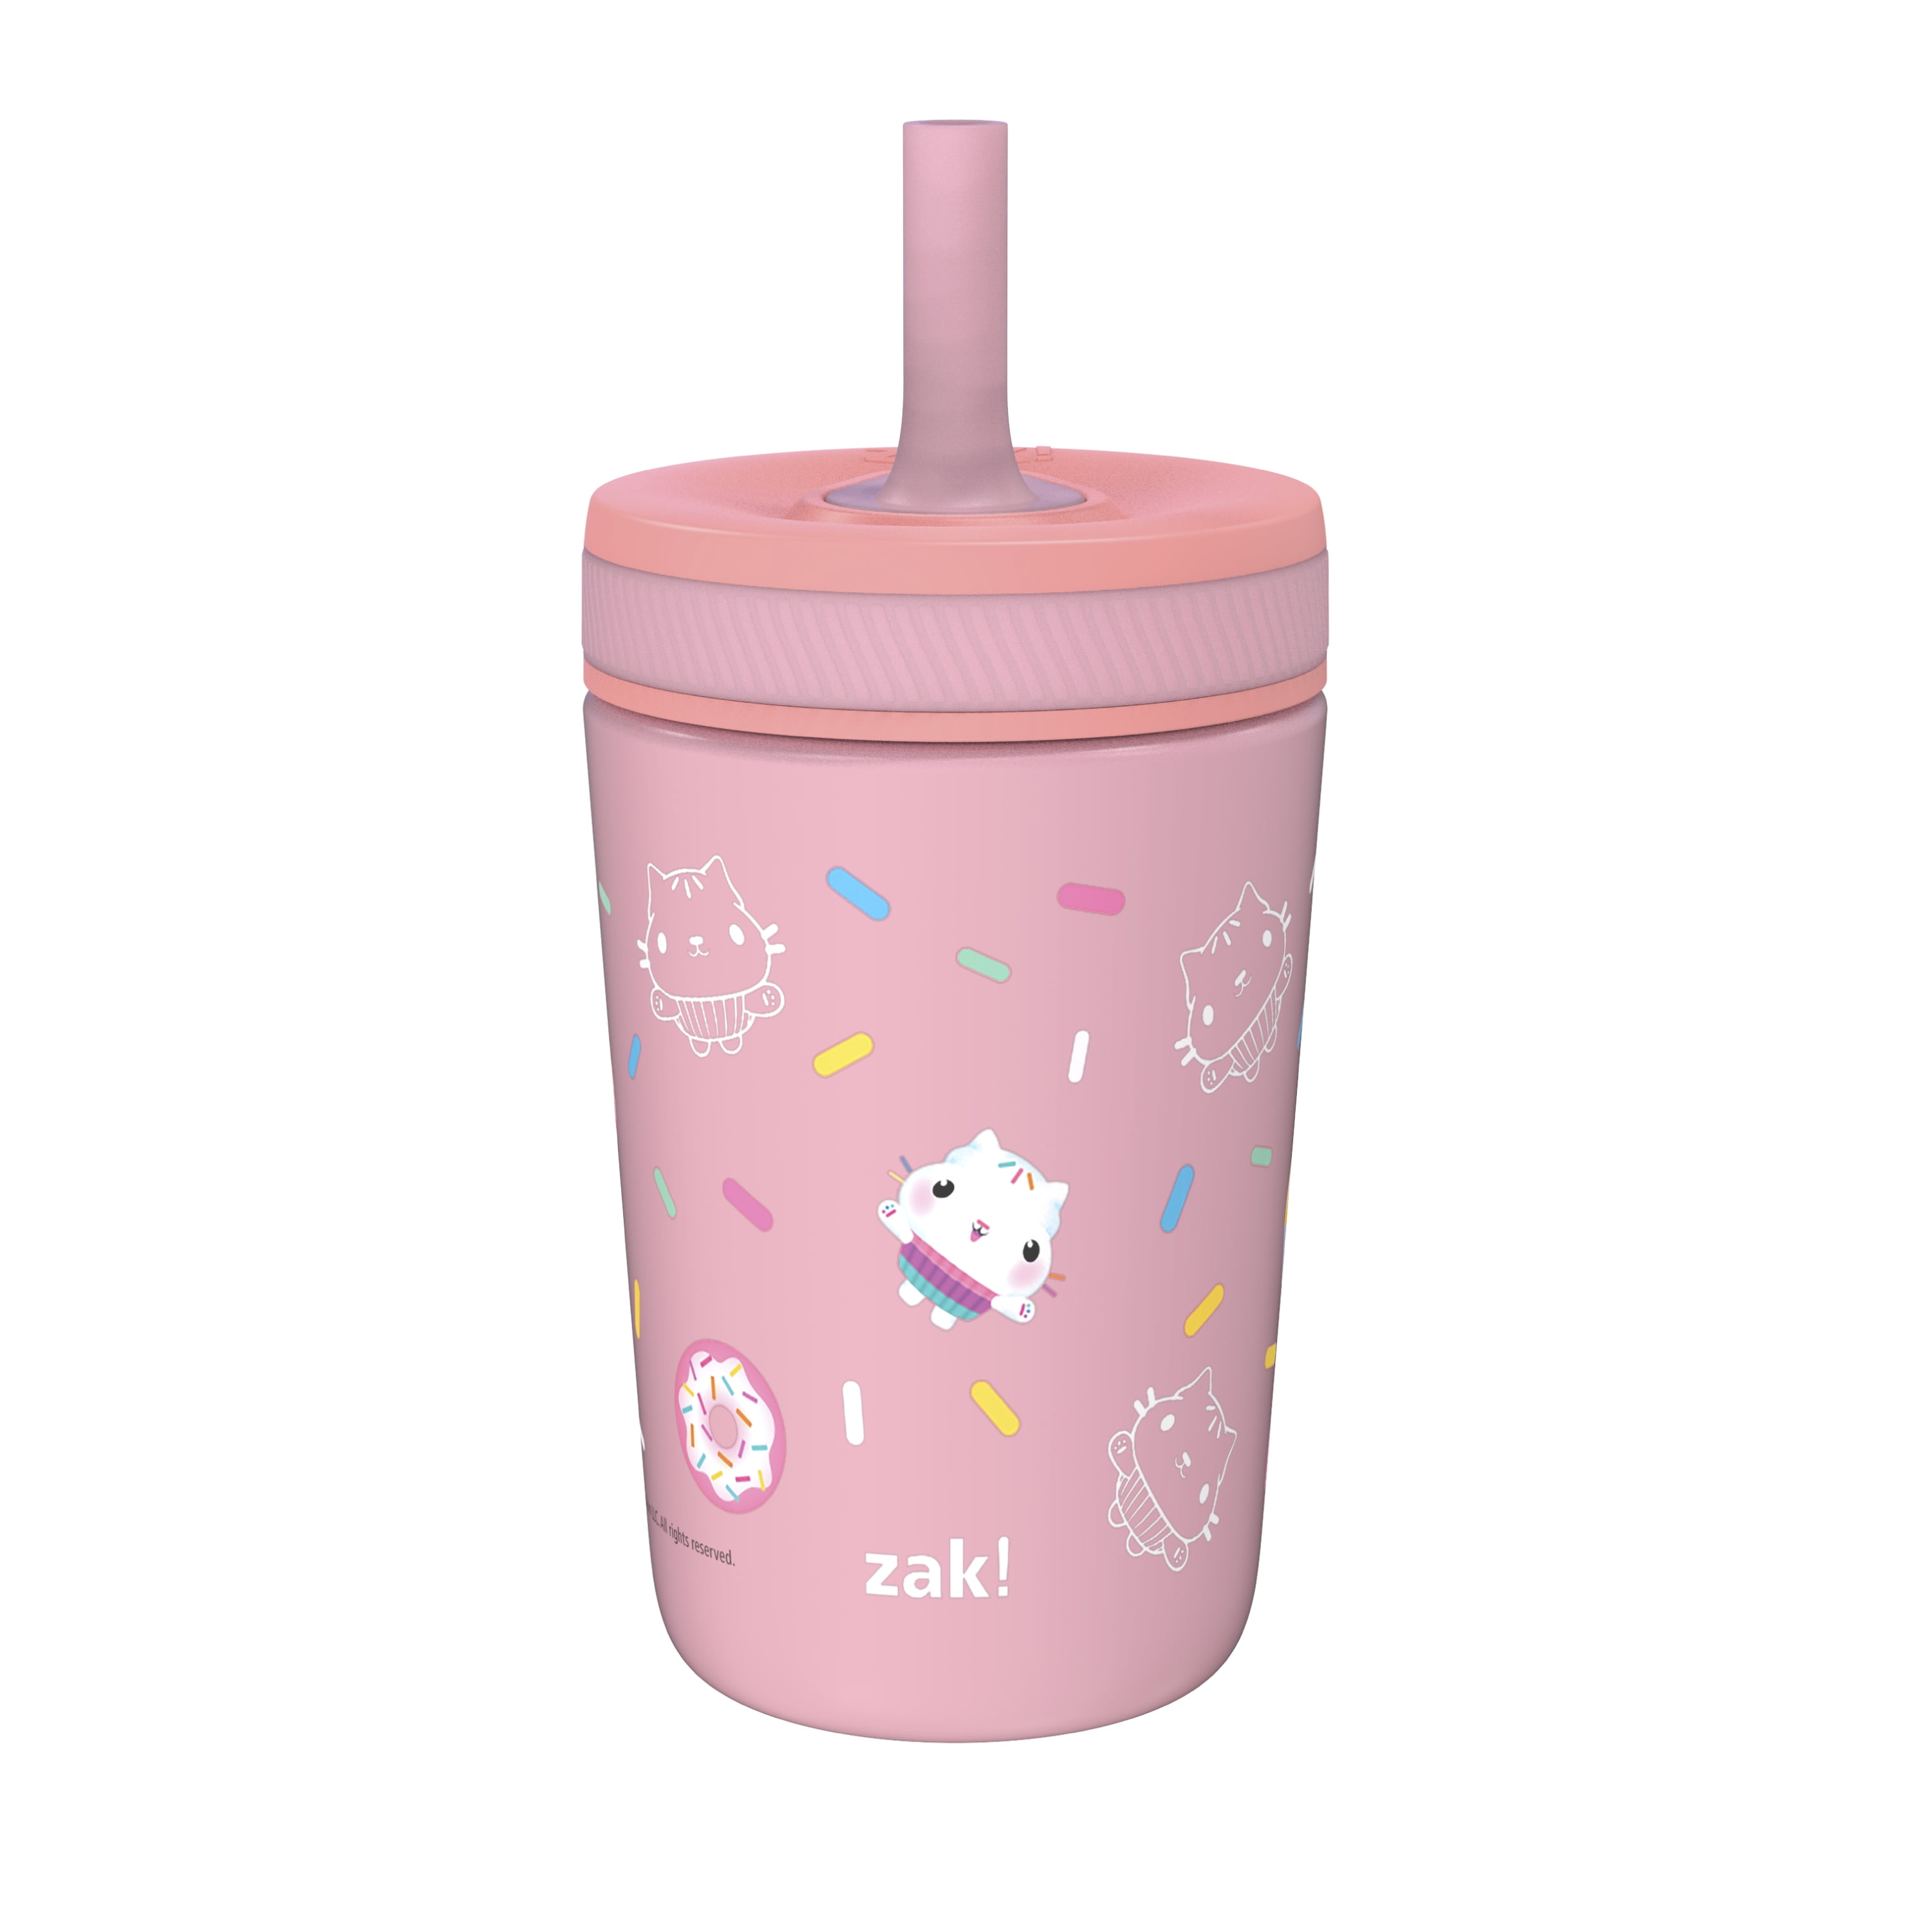 Zak Designs Gabby's Dollhouse Kelso Toddler Cups For Travel or At Home,  15oz 2-Pack Durable Plastic …See more Zak Designs Gabby's Dollhouse Kelso